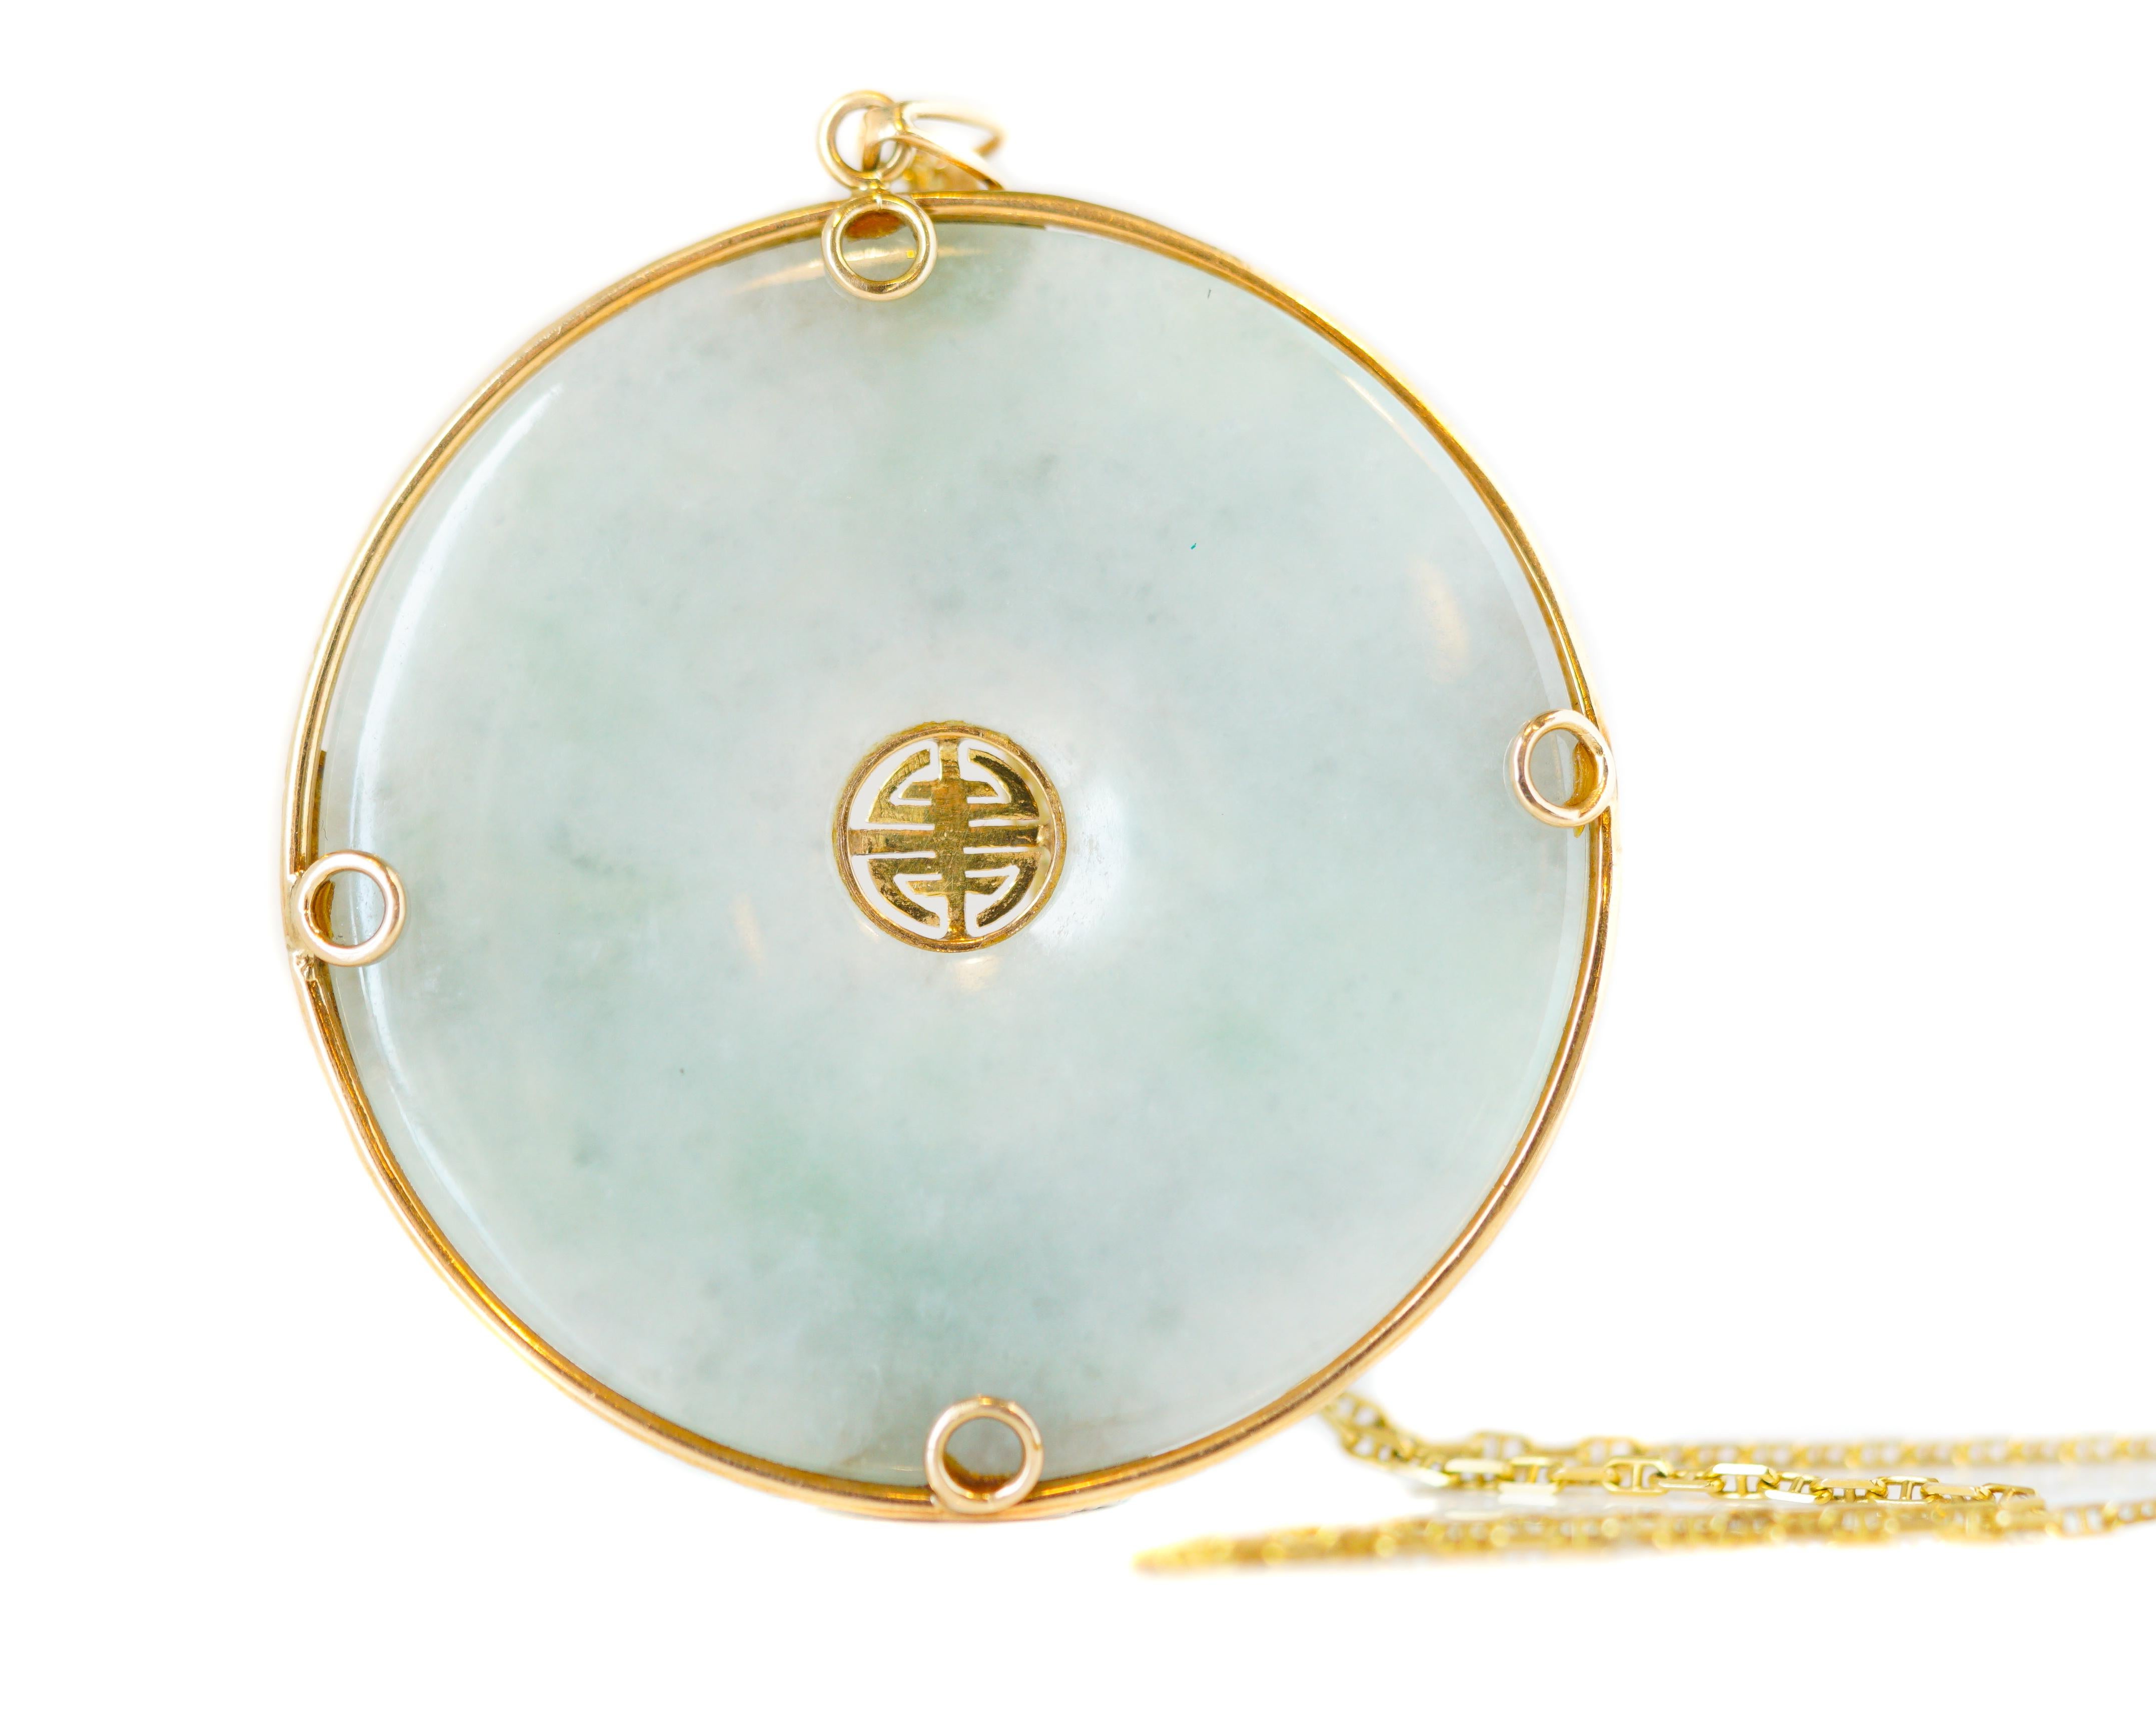 1950s Retro Good Luck Jade Necklace - 14 Karat Yellow Gold, Jade

Features:
2.25 inch wide Jade Disc Pendant 
14 Karat Yellow Gold Frame, Center and Border
Double Bail on pendant for added stability
18 inch long, 14 Karat Yellow Gold, Horse Bit